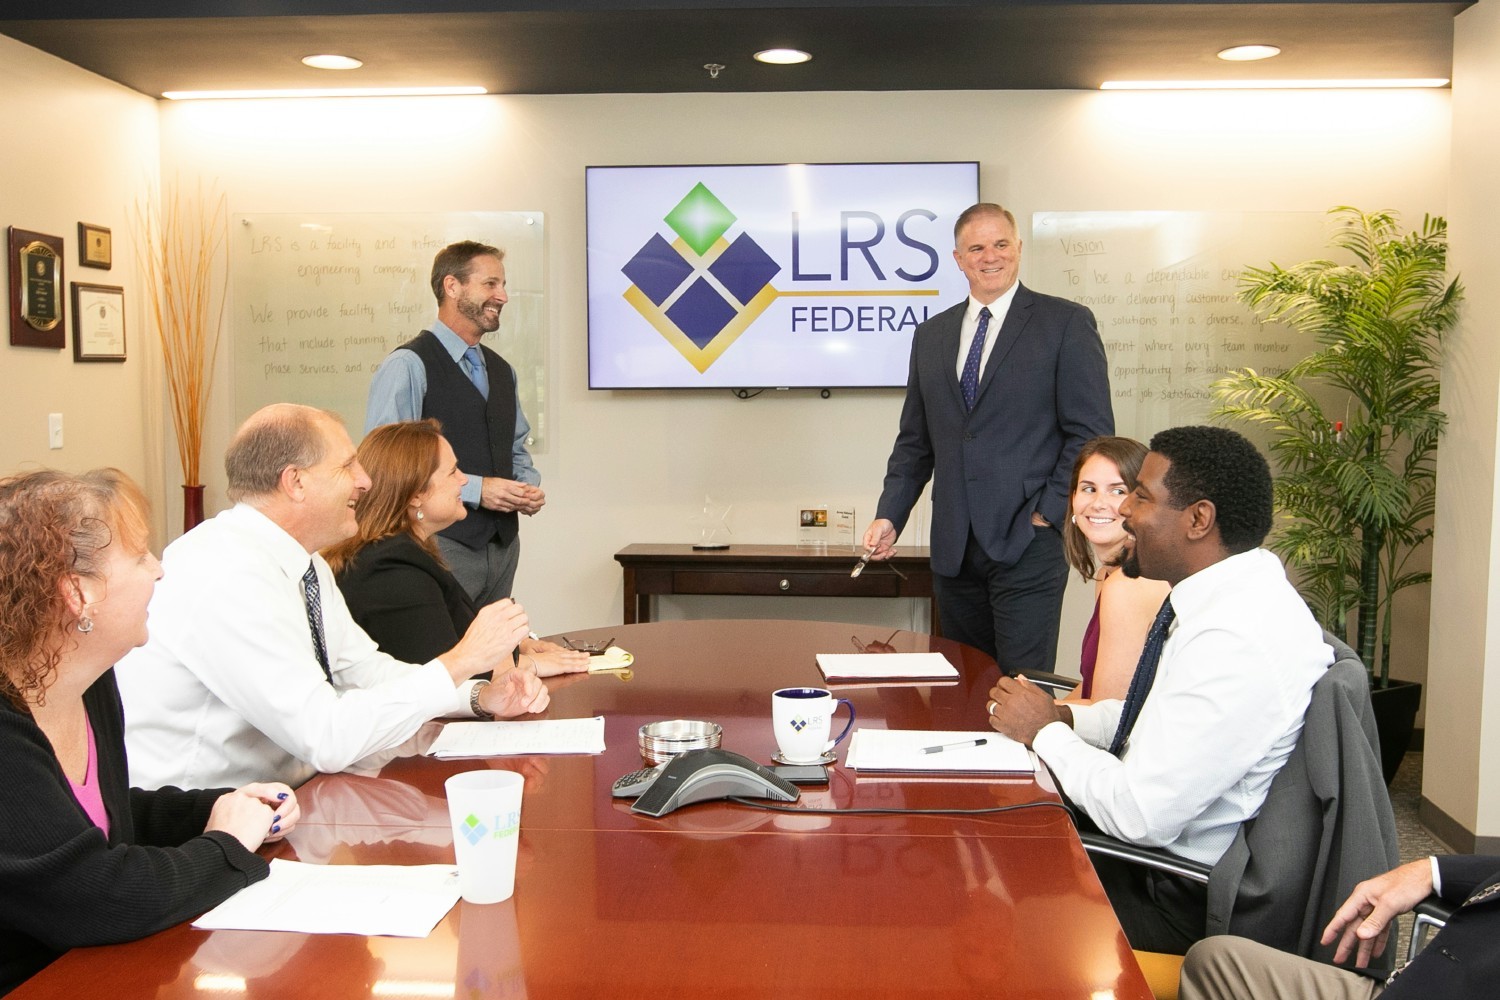 LRS Management Staff in a Meeting in the HQ Conference Room